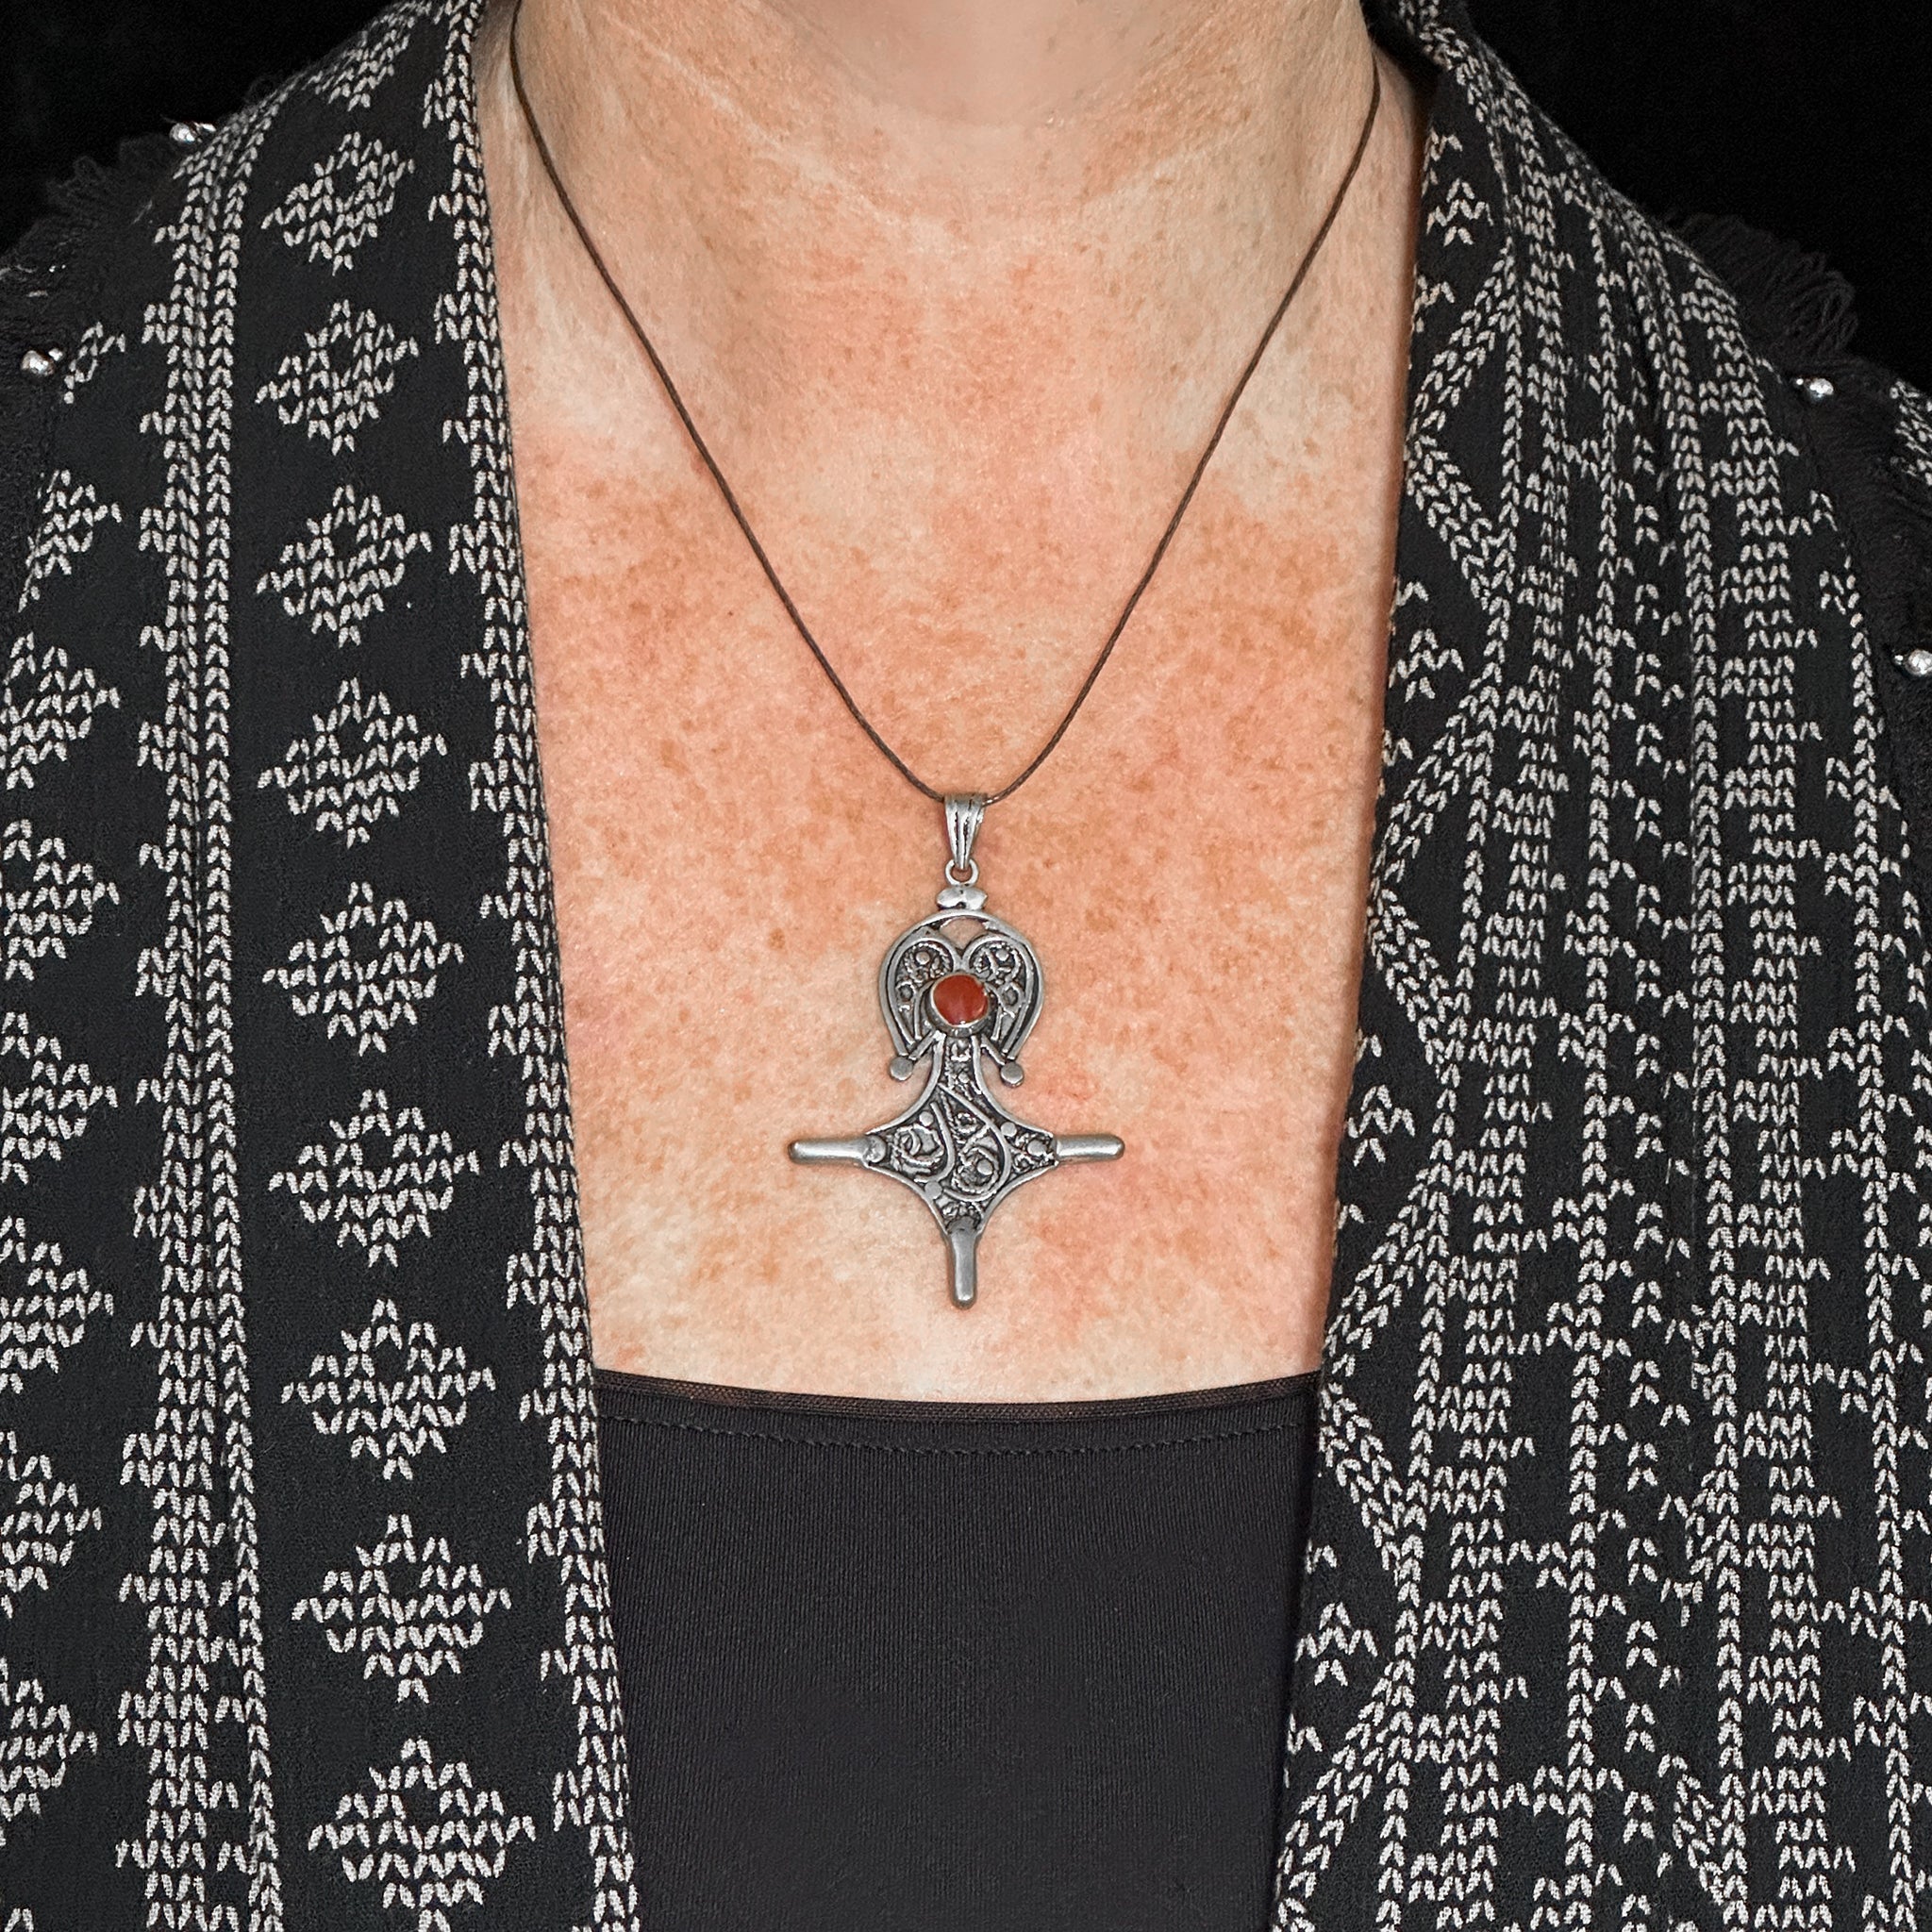 Stylised Silver Southern Cross Pendant from Guelmim, Morocco